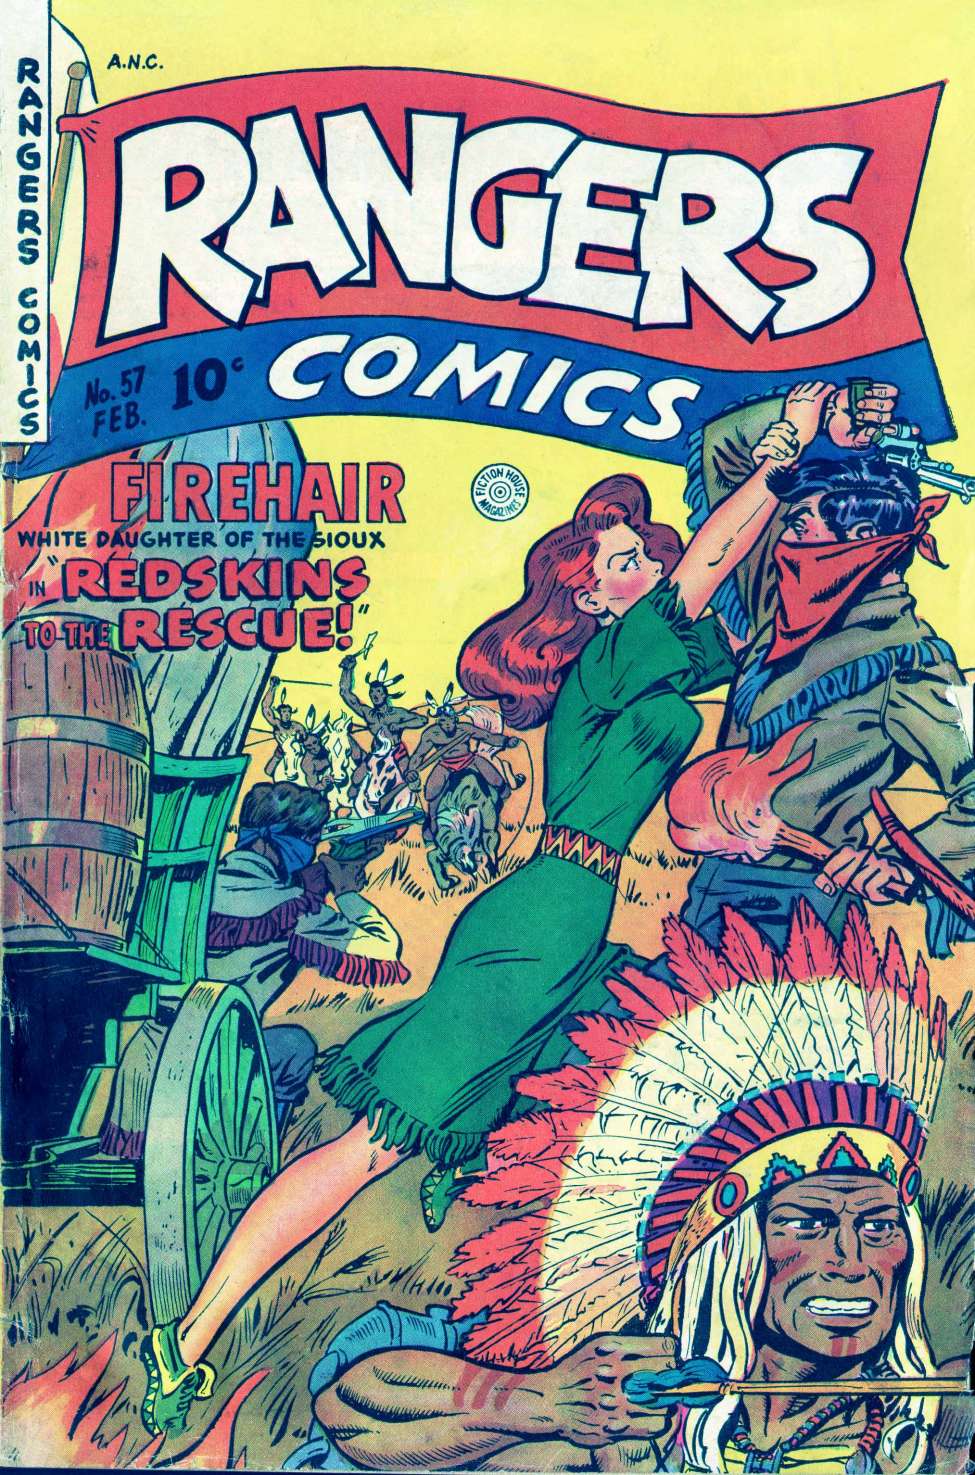 Book Cover For Rangers Comics 57